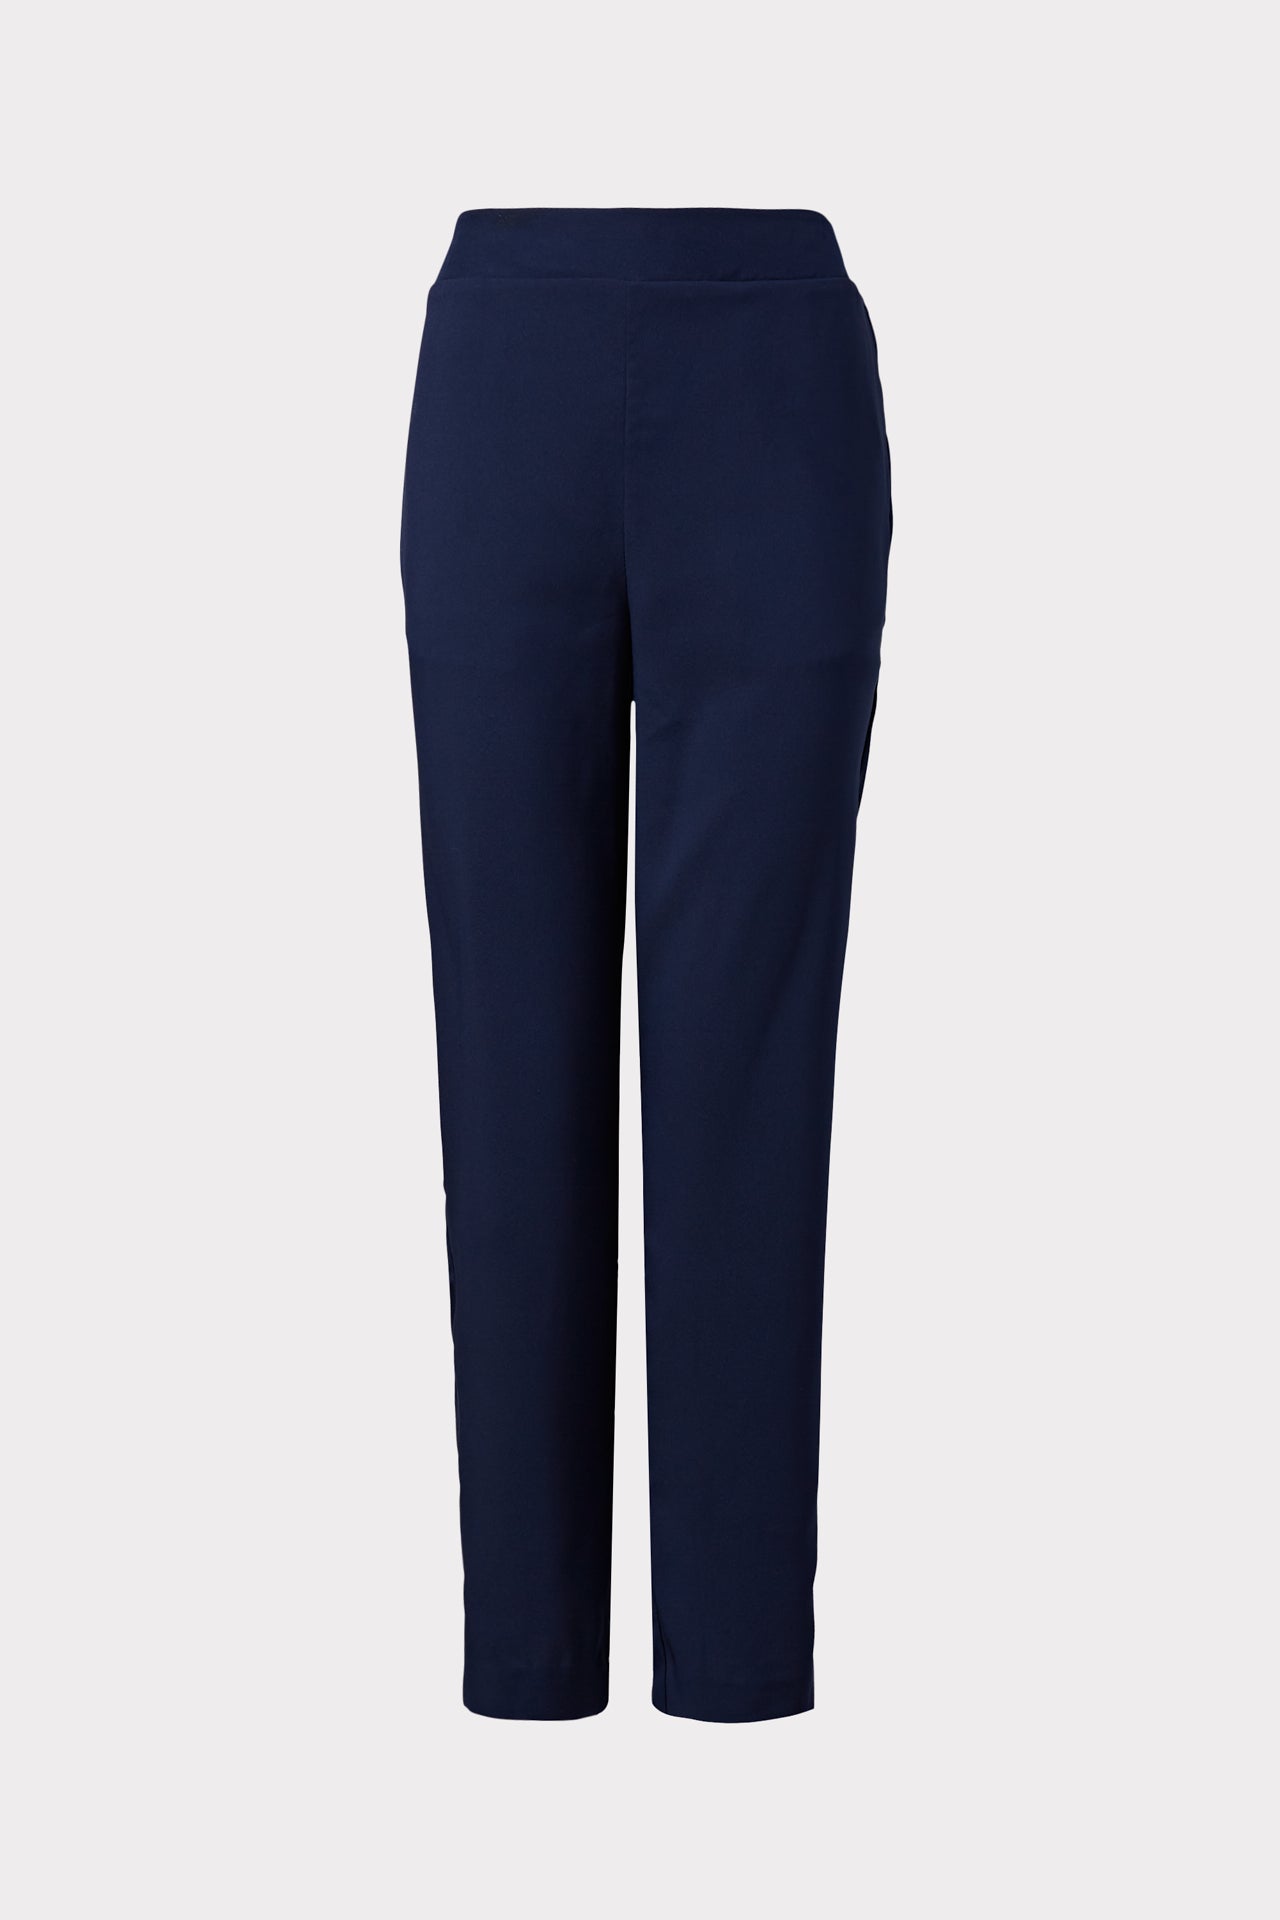 Milly Marcia Satin Pants In Navy